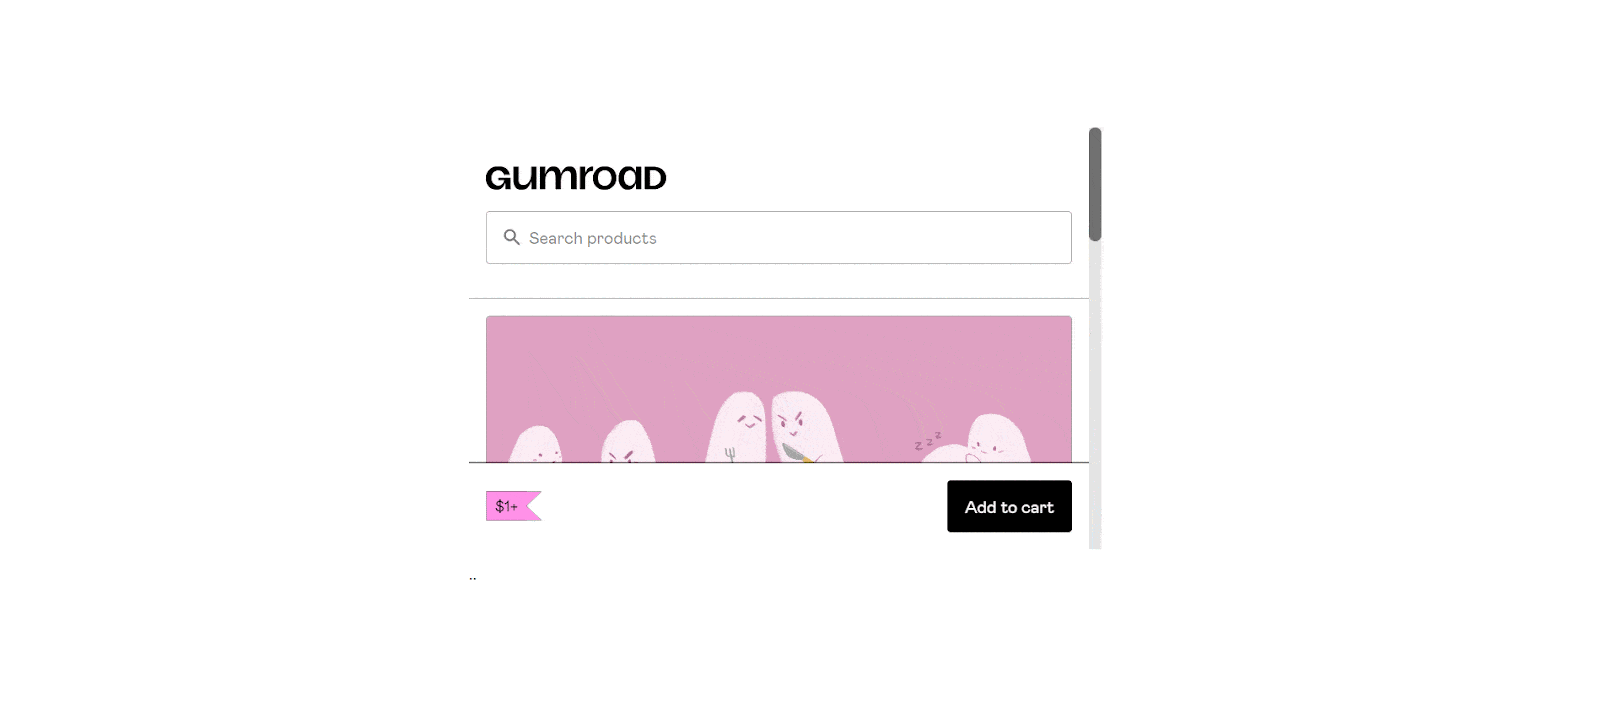 Embed Gumroad Product